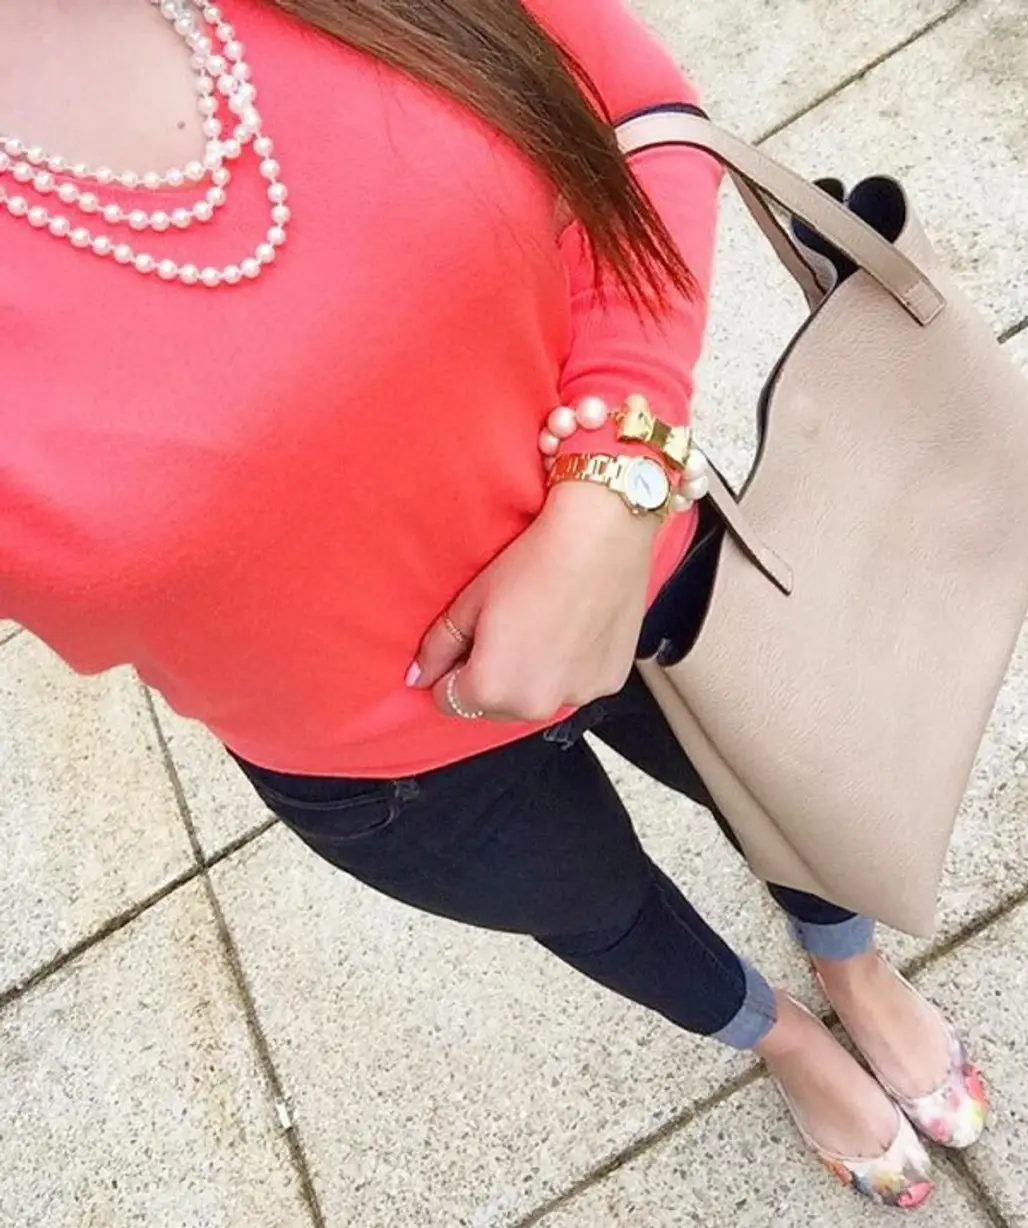 Her Pretty Coral Top